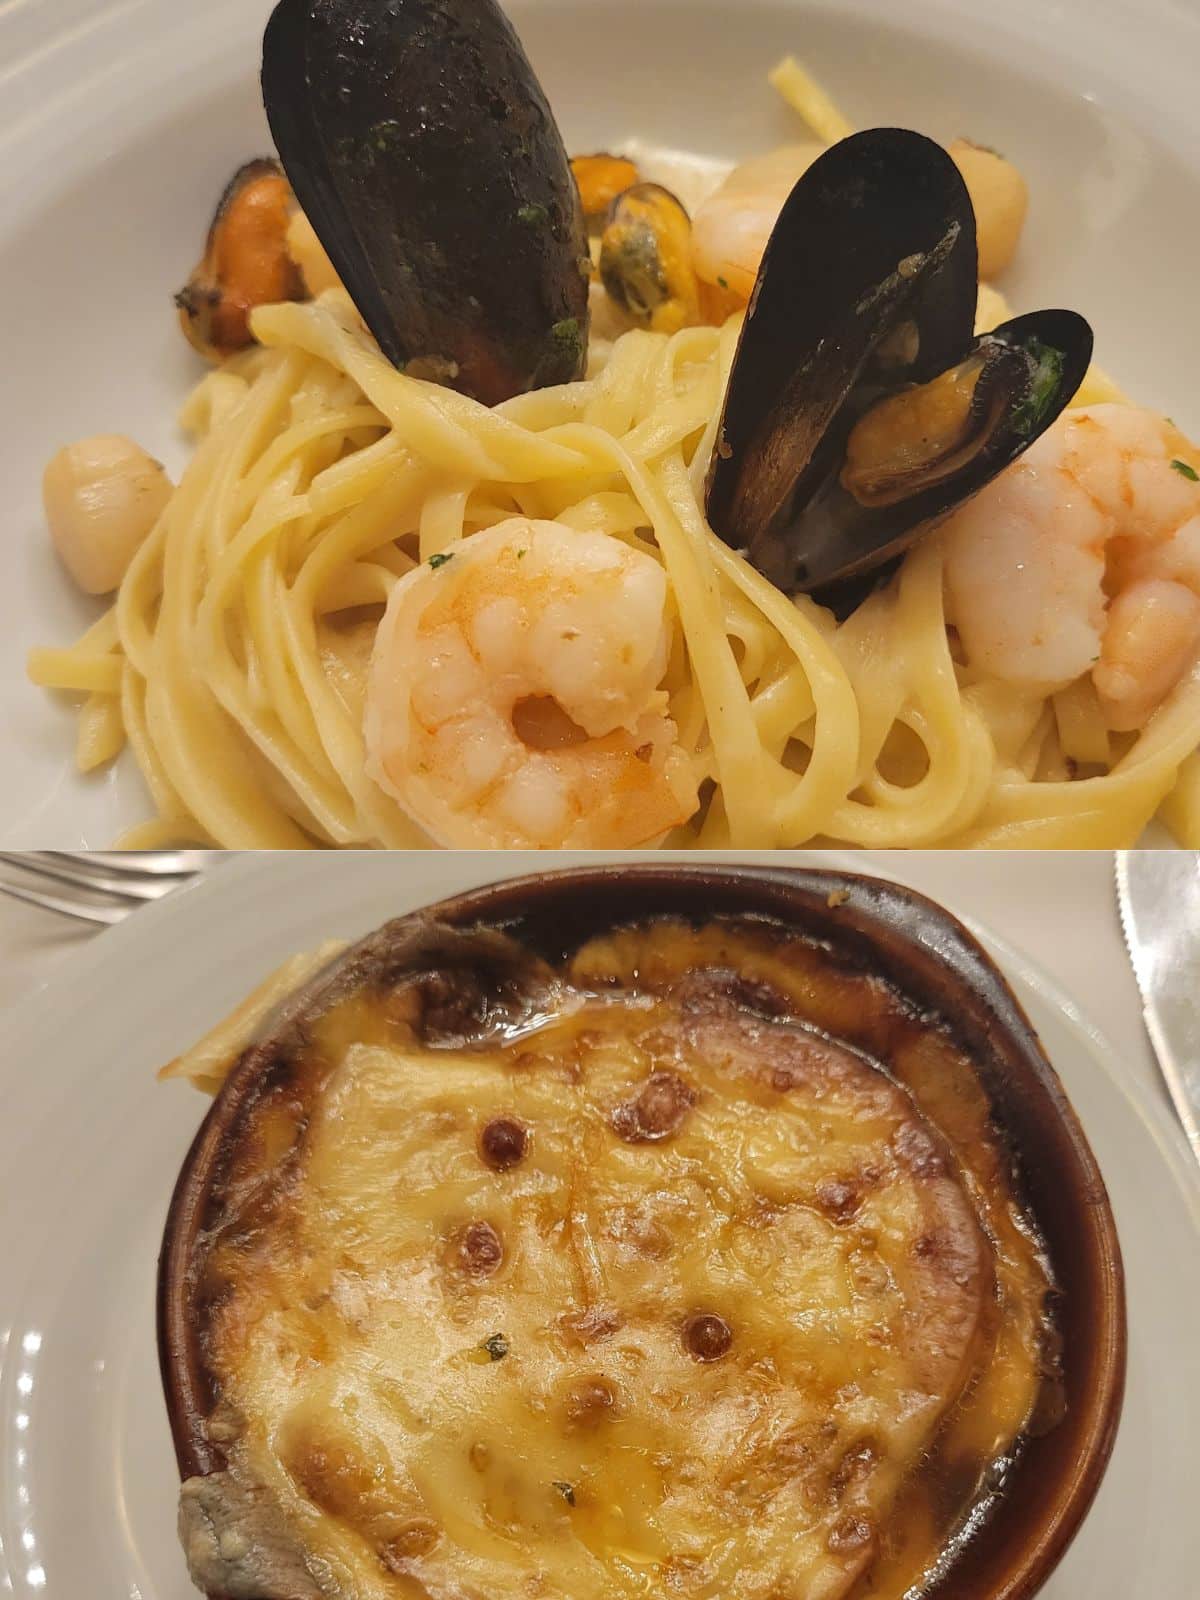 A bowl of French onion soup with tons of melted cheese on top and a dish of seafood linguine topped with shrimp and mussels. 